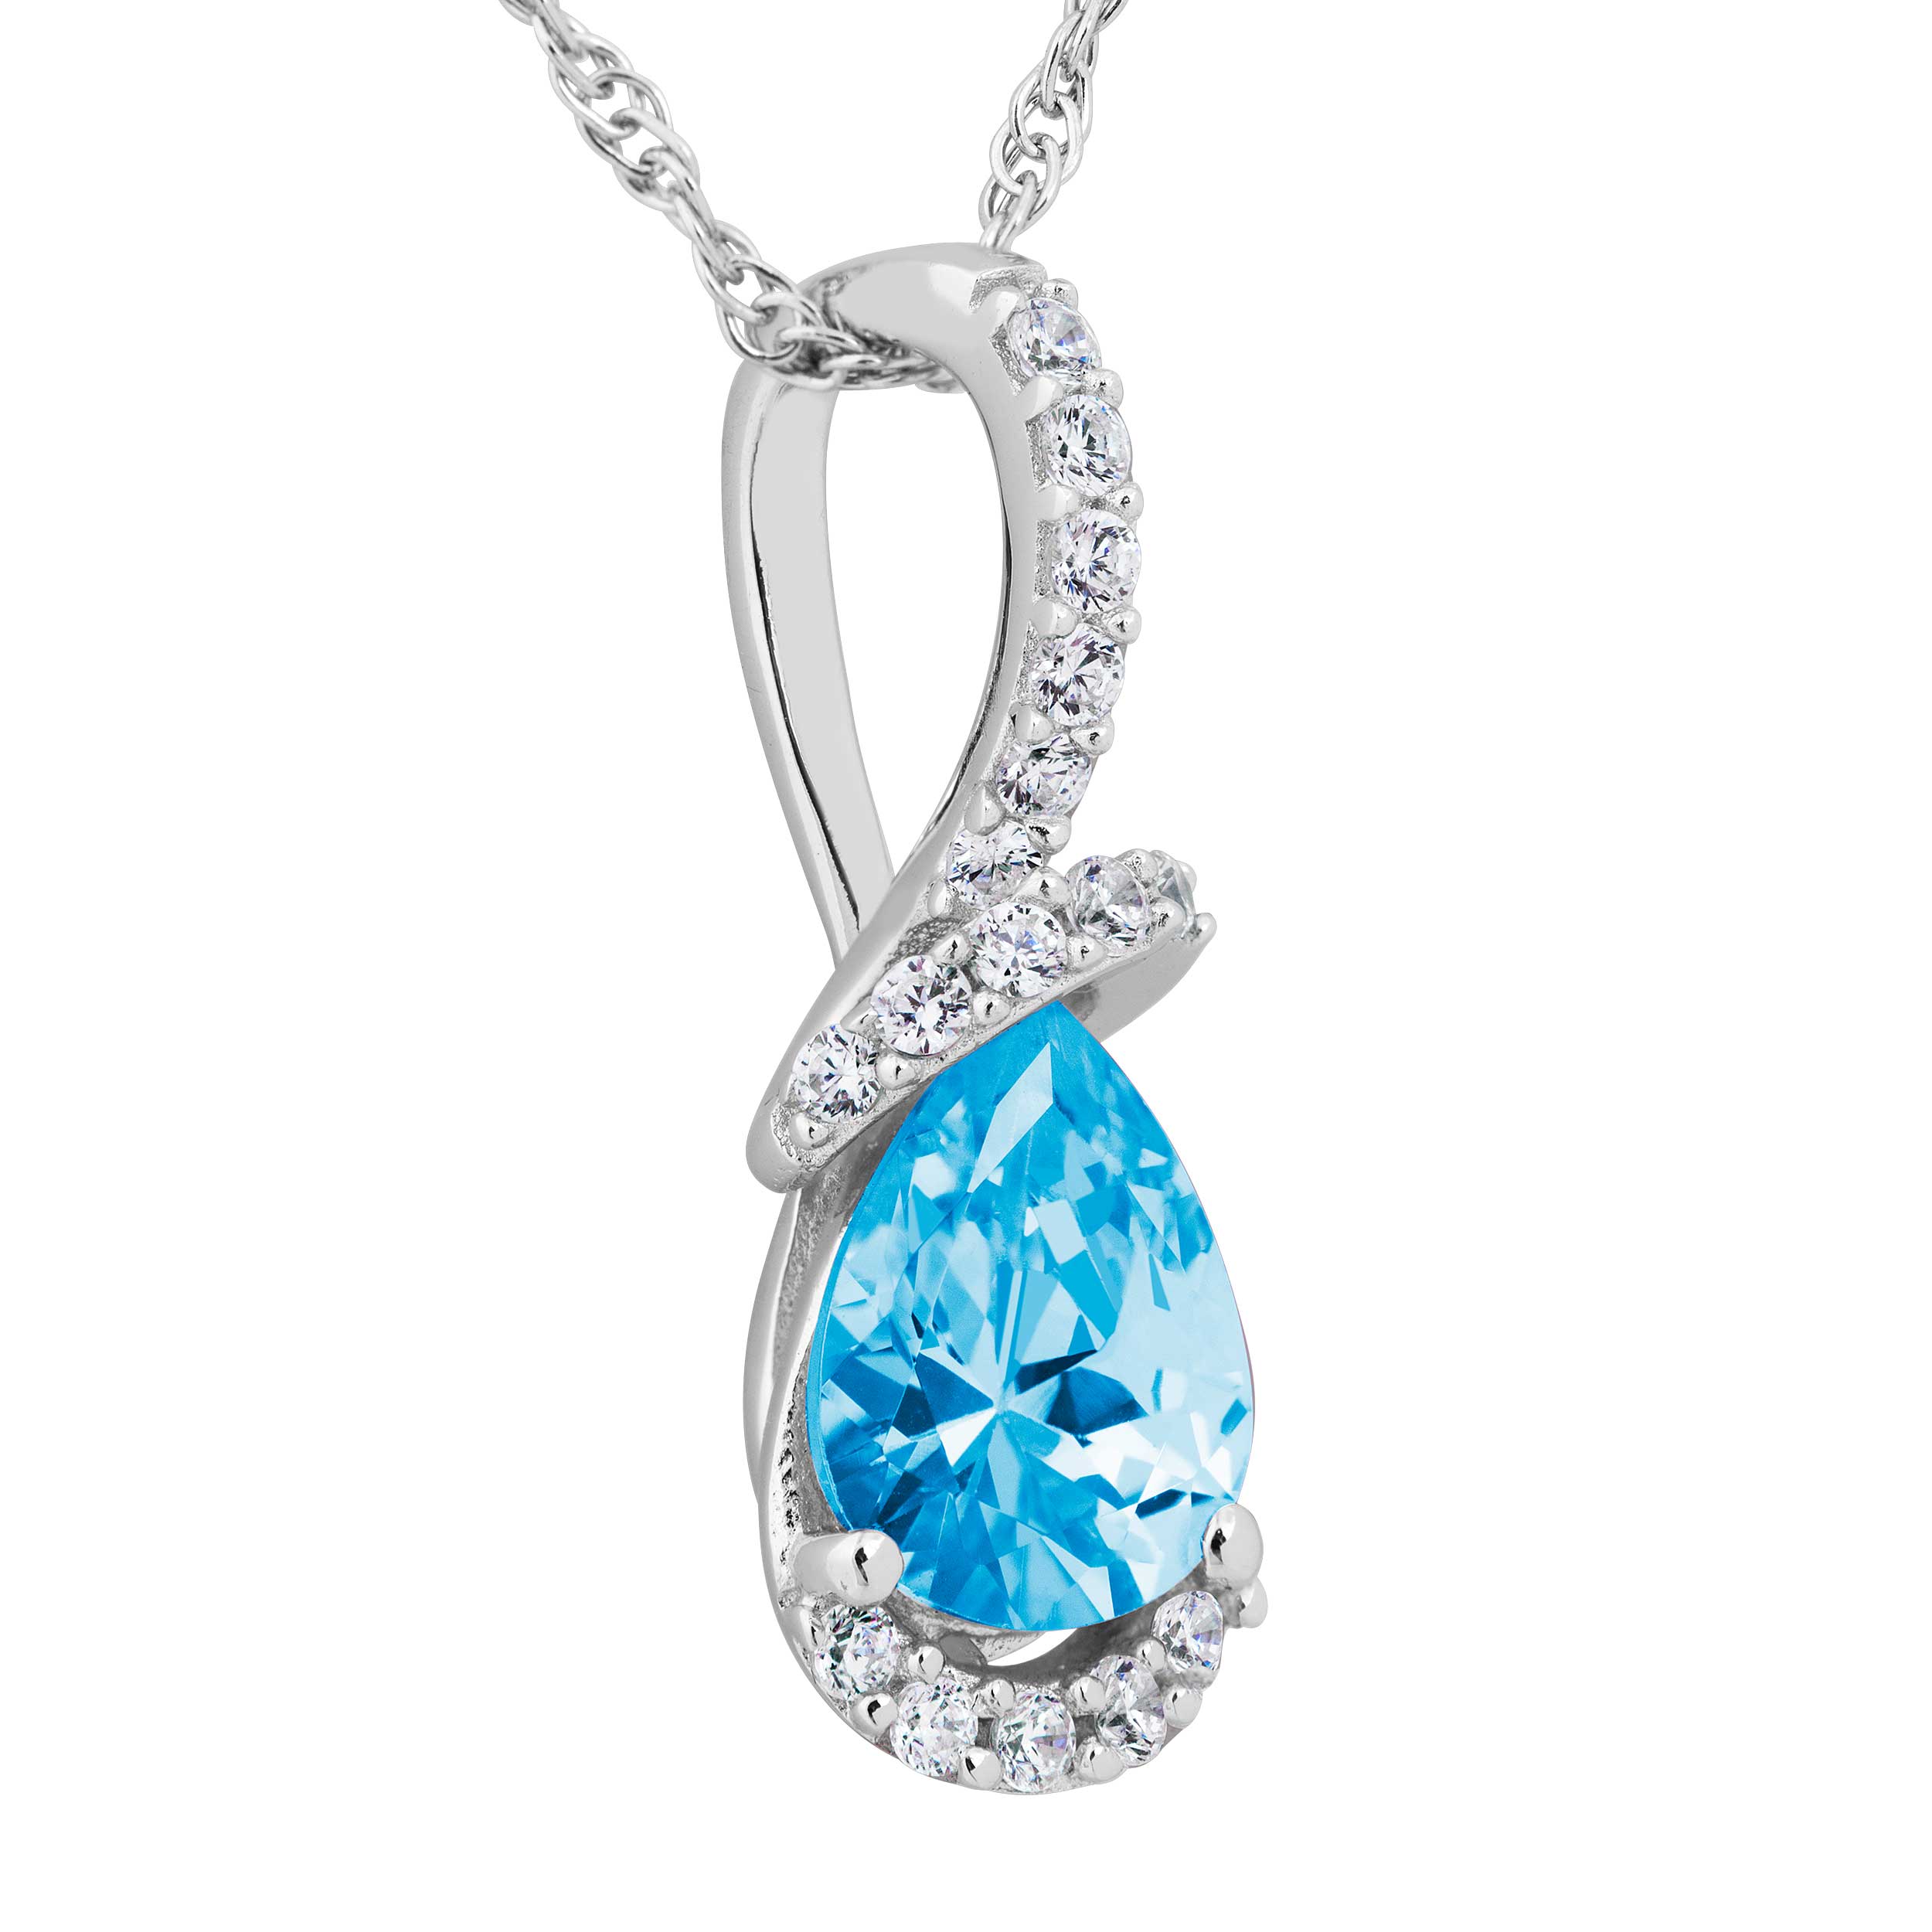 Pear Swiss Blue Topaz and White Topaz Pendant Necklace, Rhodium Plated Sterling Silver